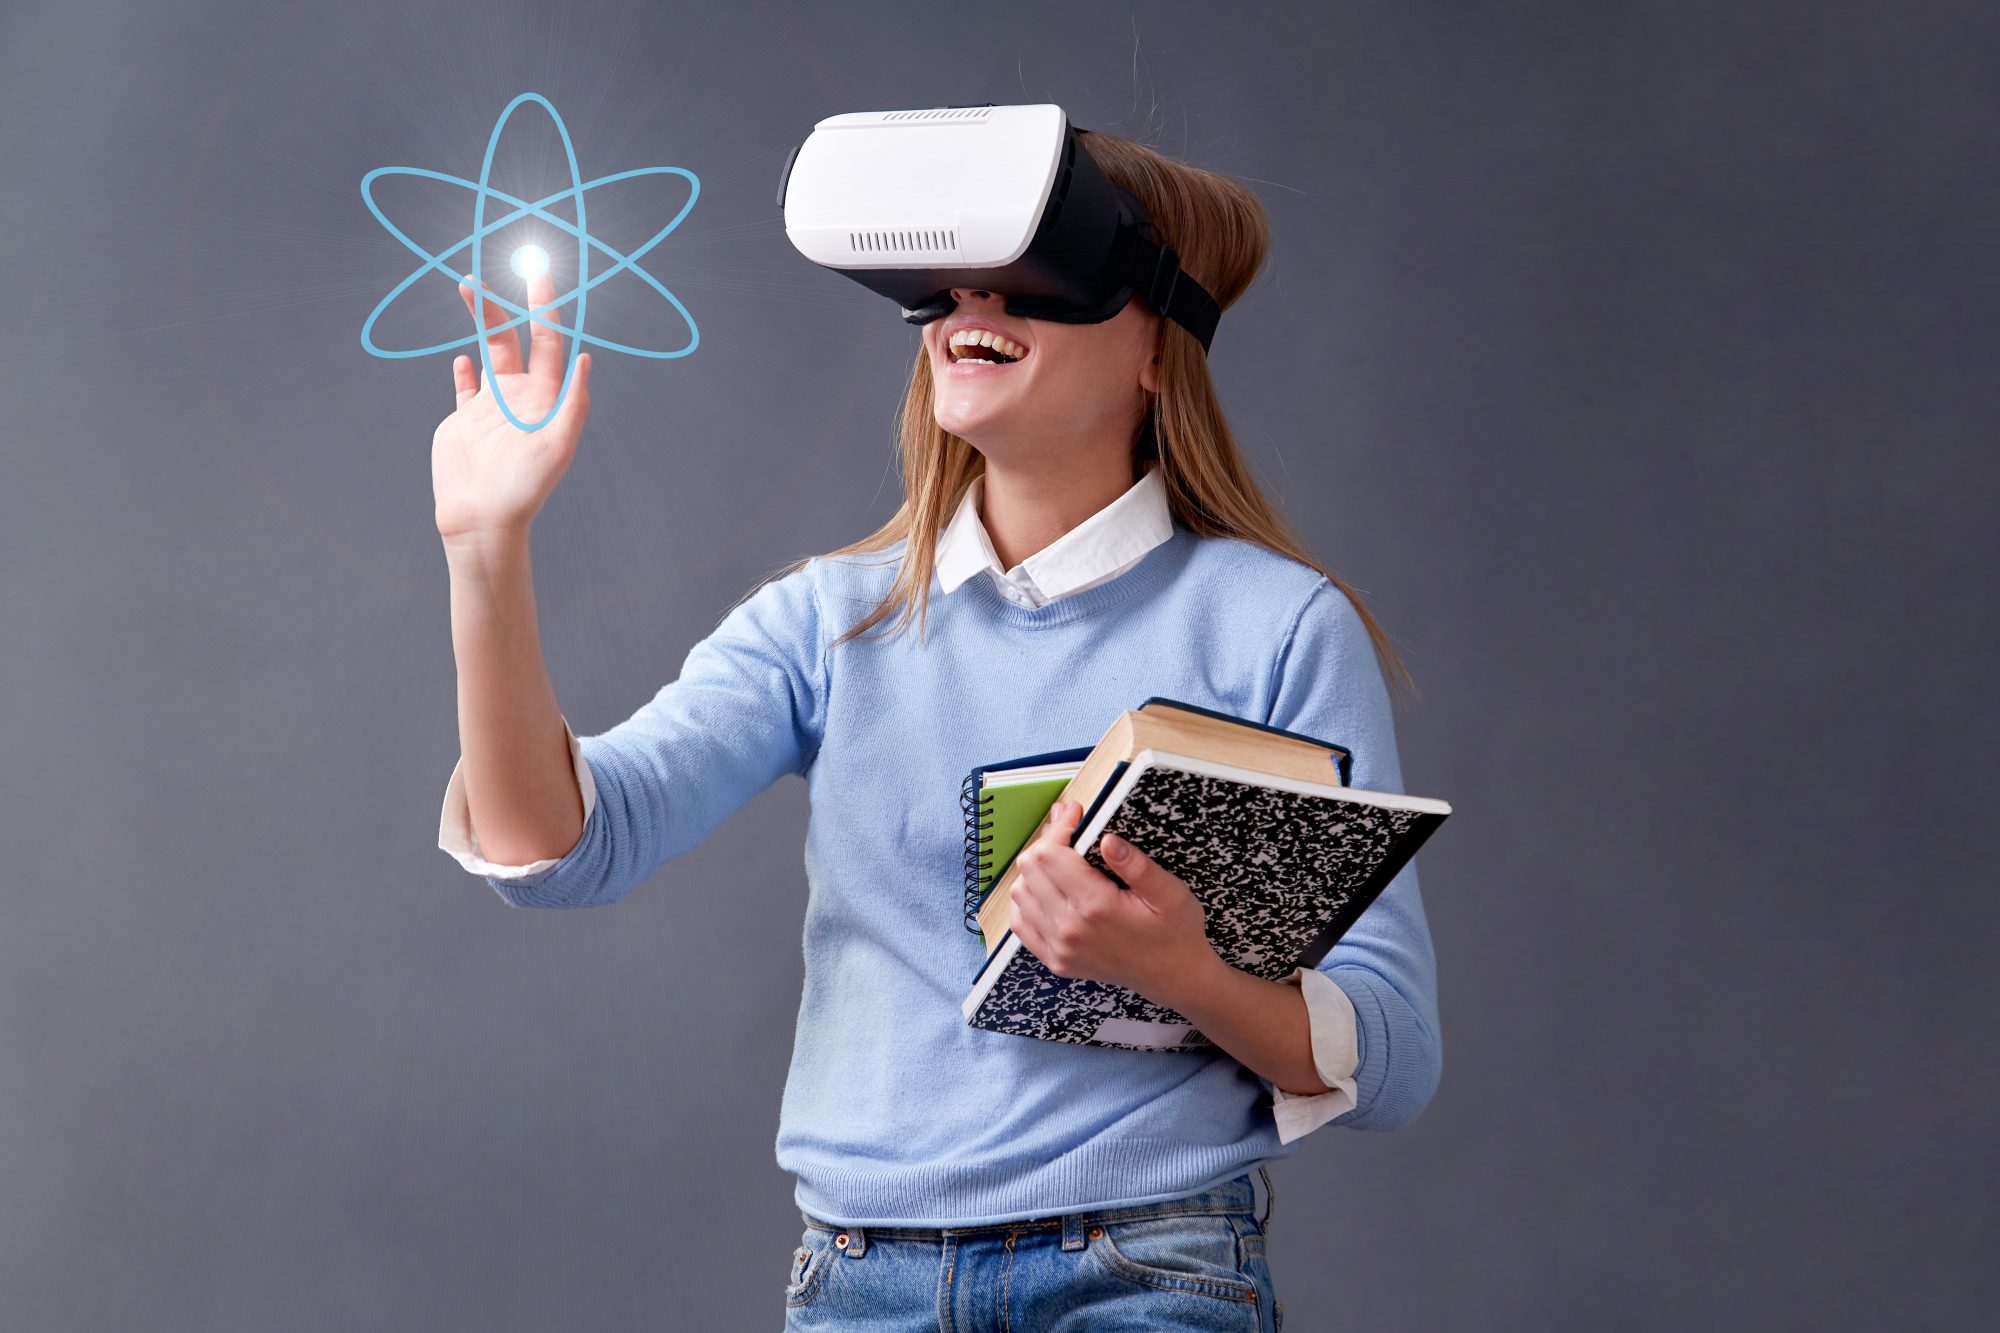 virtual reality headset for learning